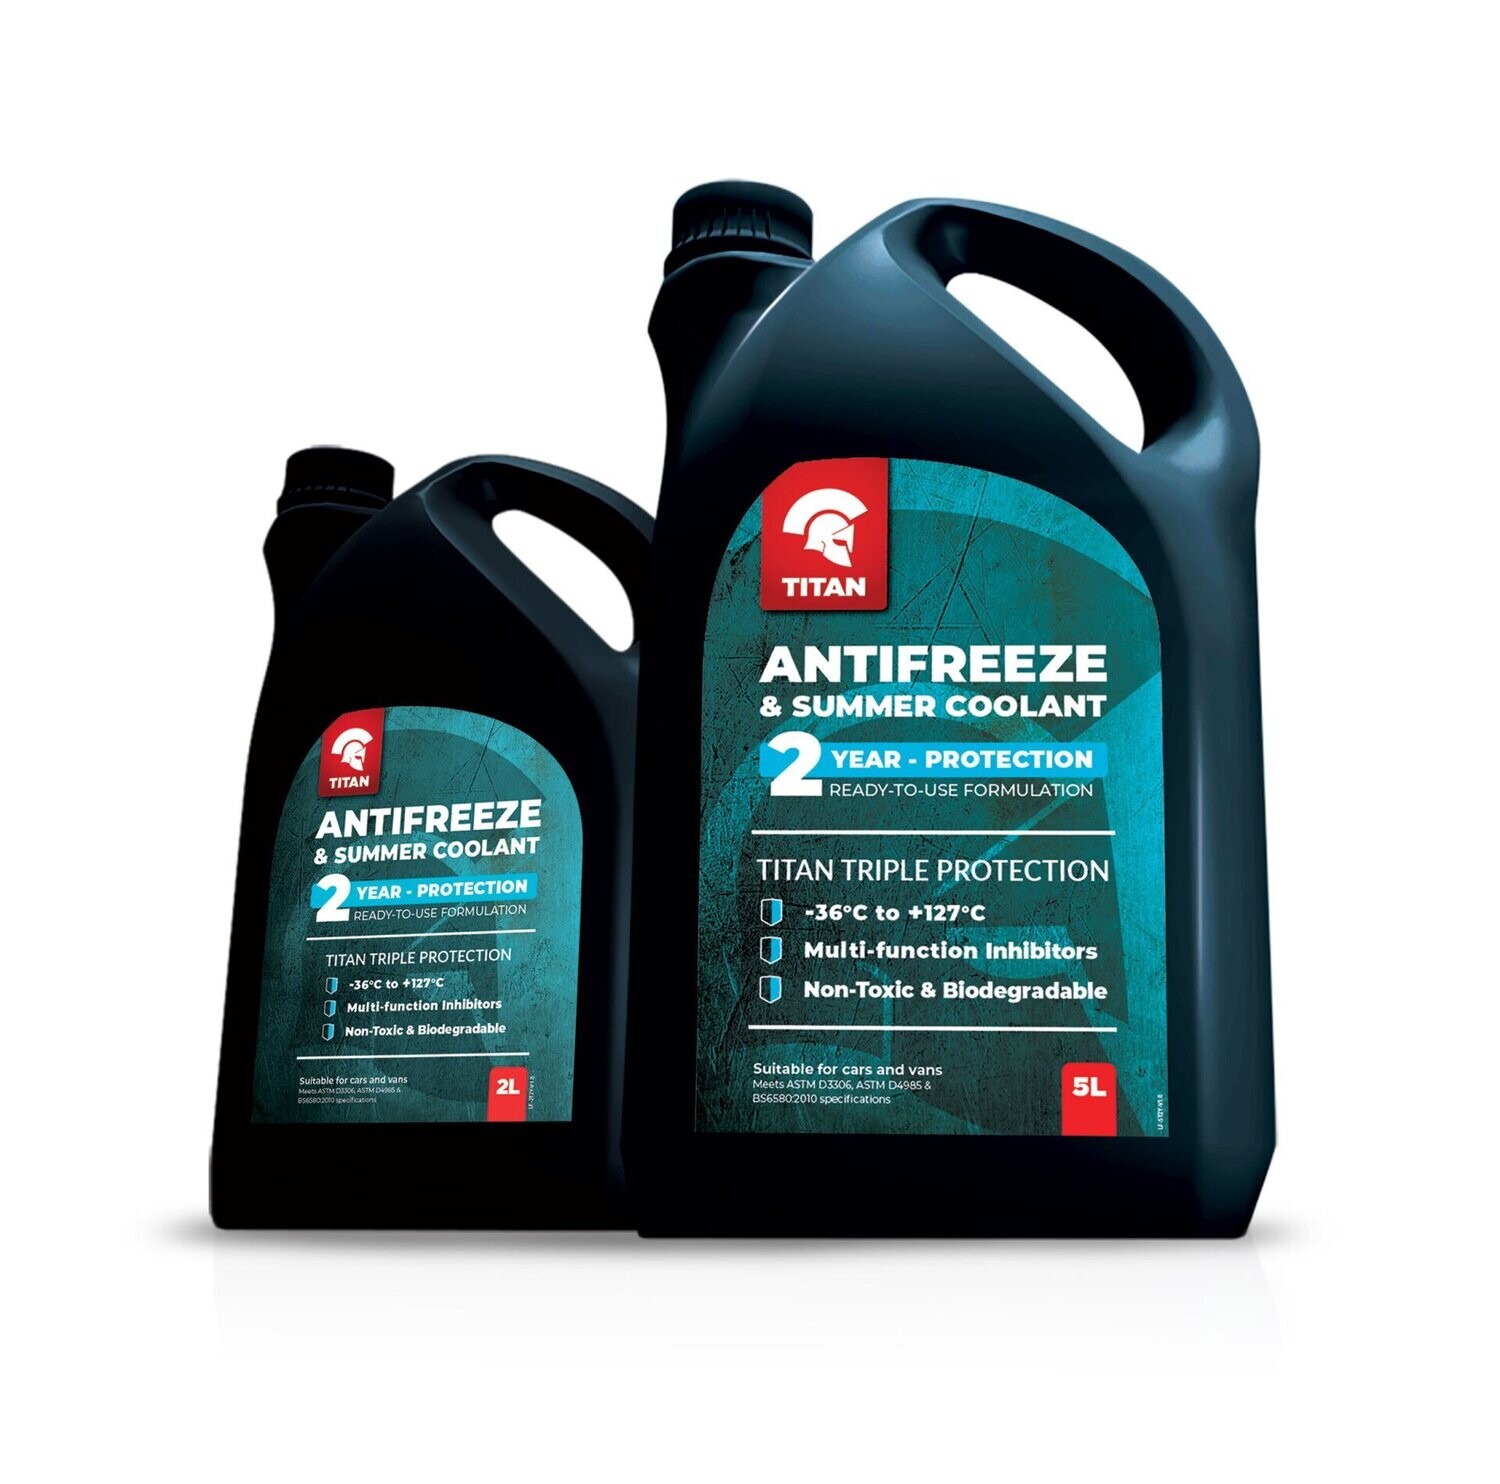 TITAN 2 YEAR ANTIFREEZE AND SUMMER COOLANT 50/50 PREMIX
READY TO USE 5 Litres